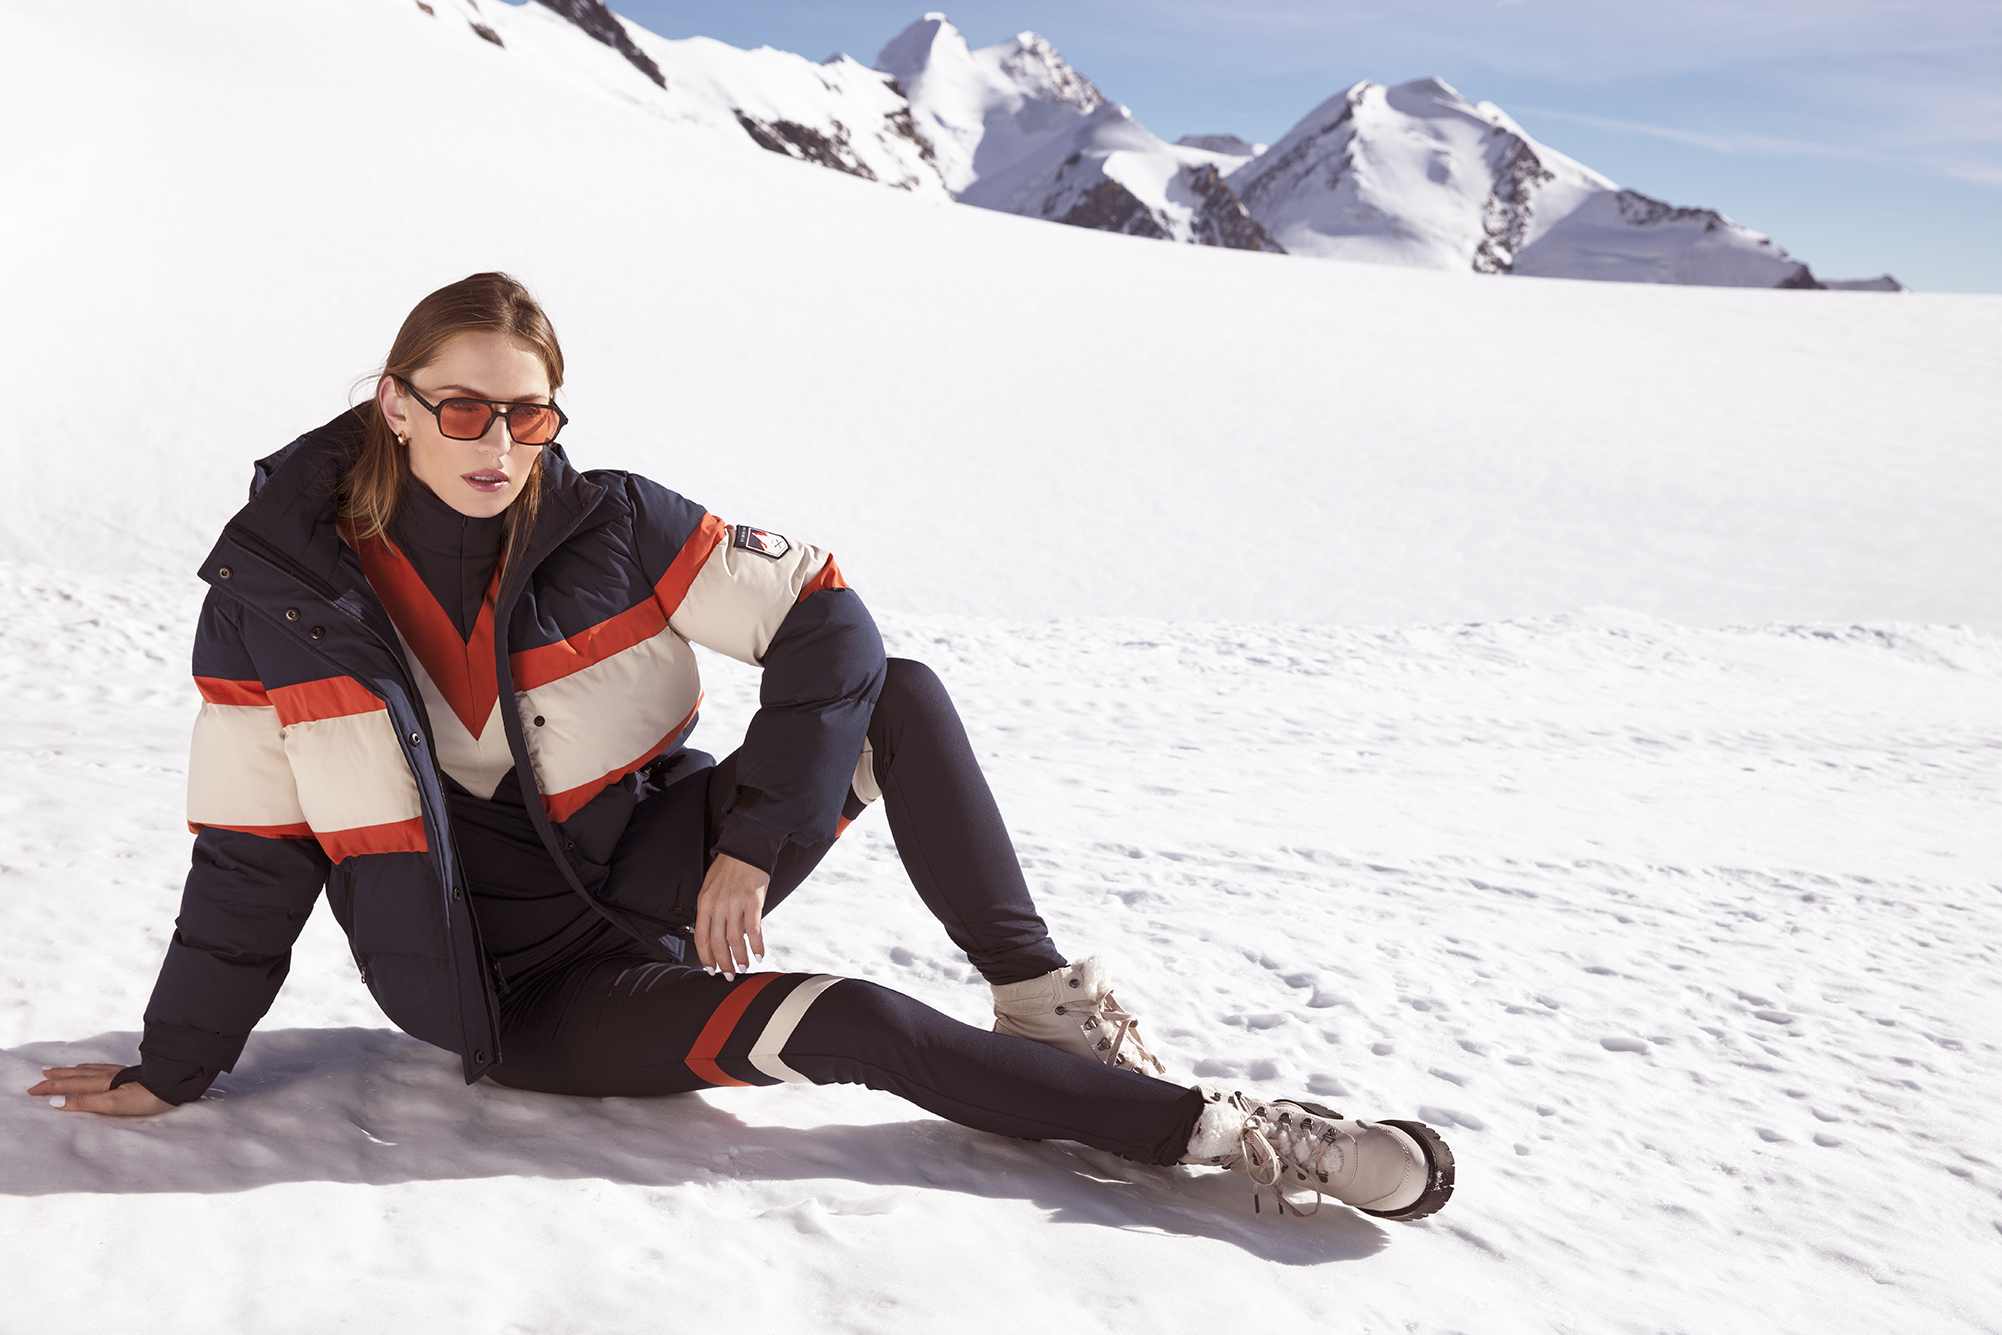 Why The Ski Capsule from By Malina is the ultimate ski collection you need for winter 21/22. 5